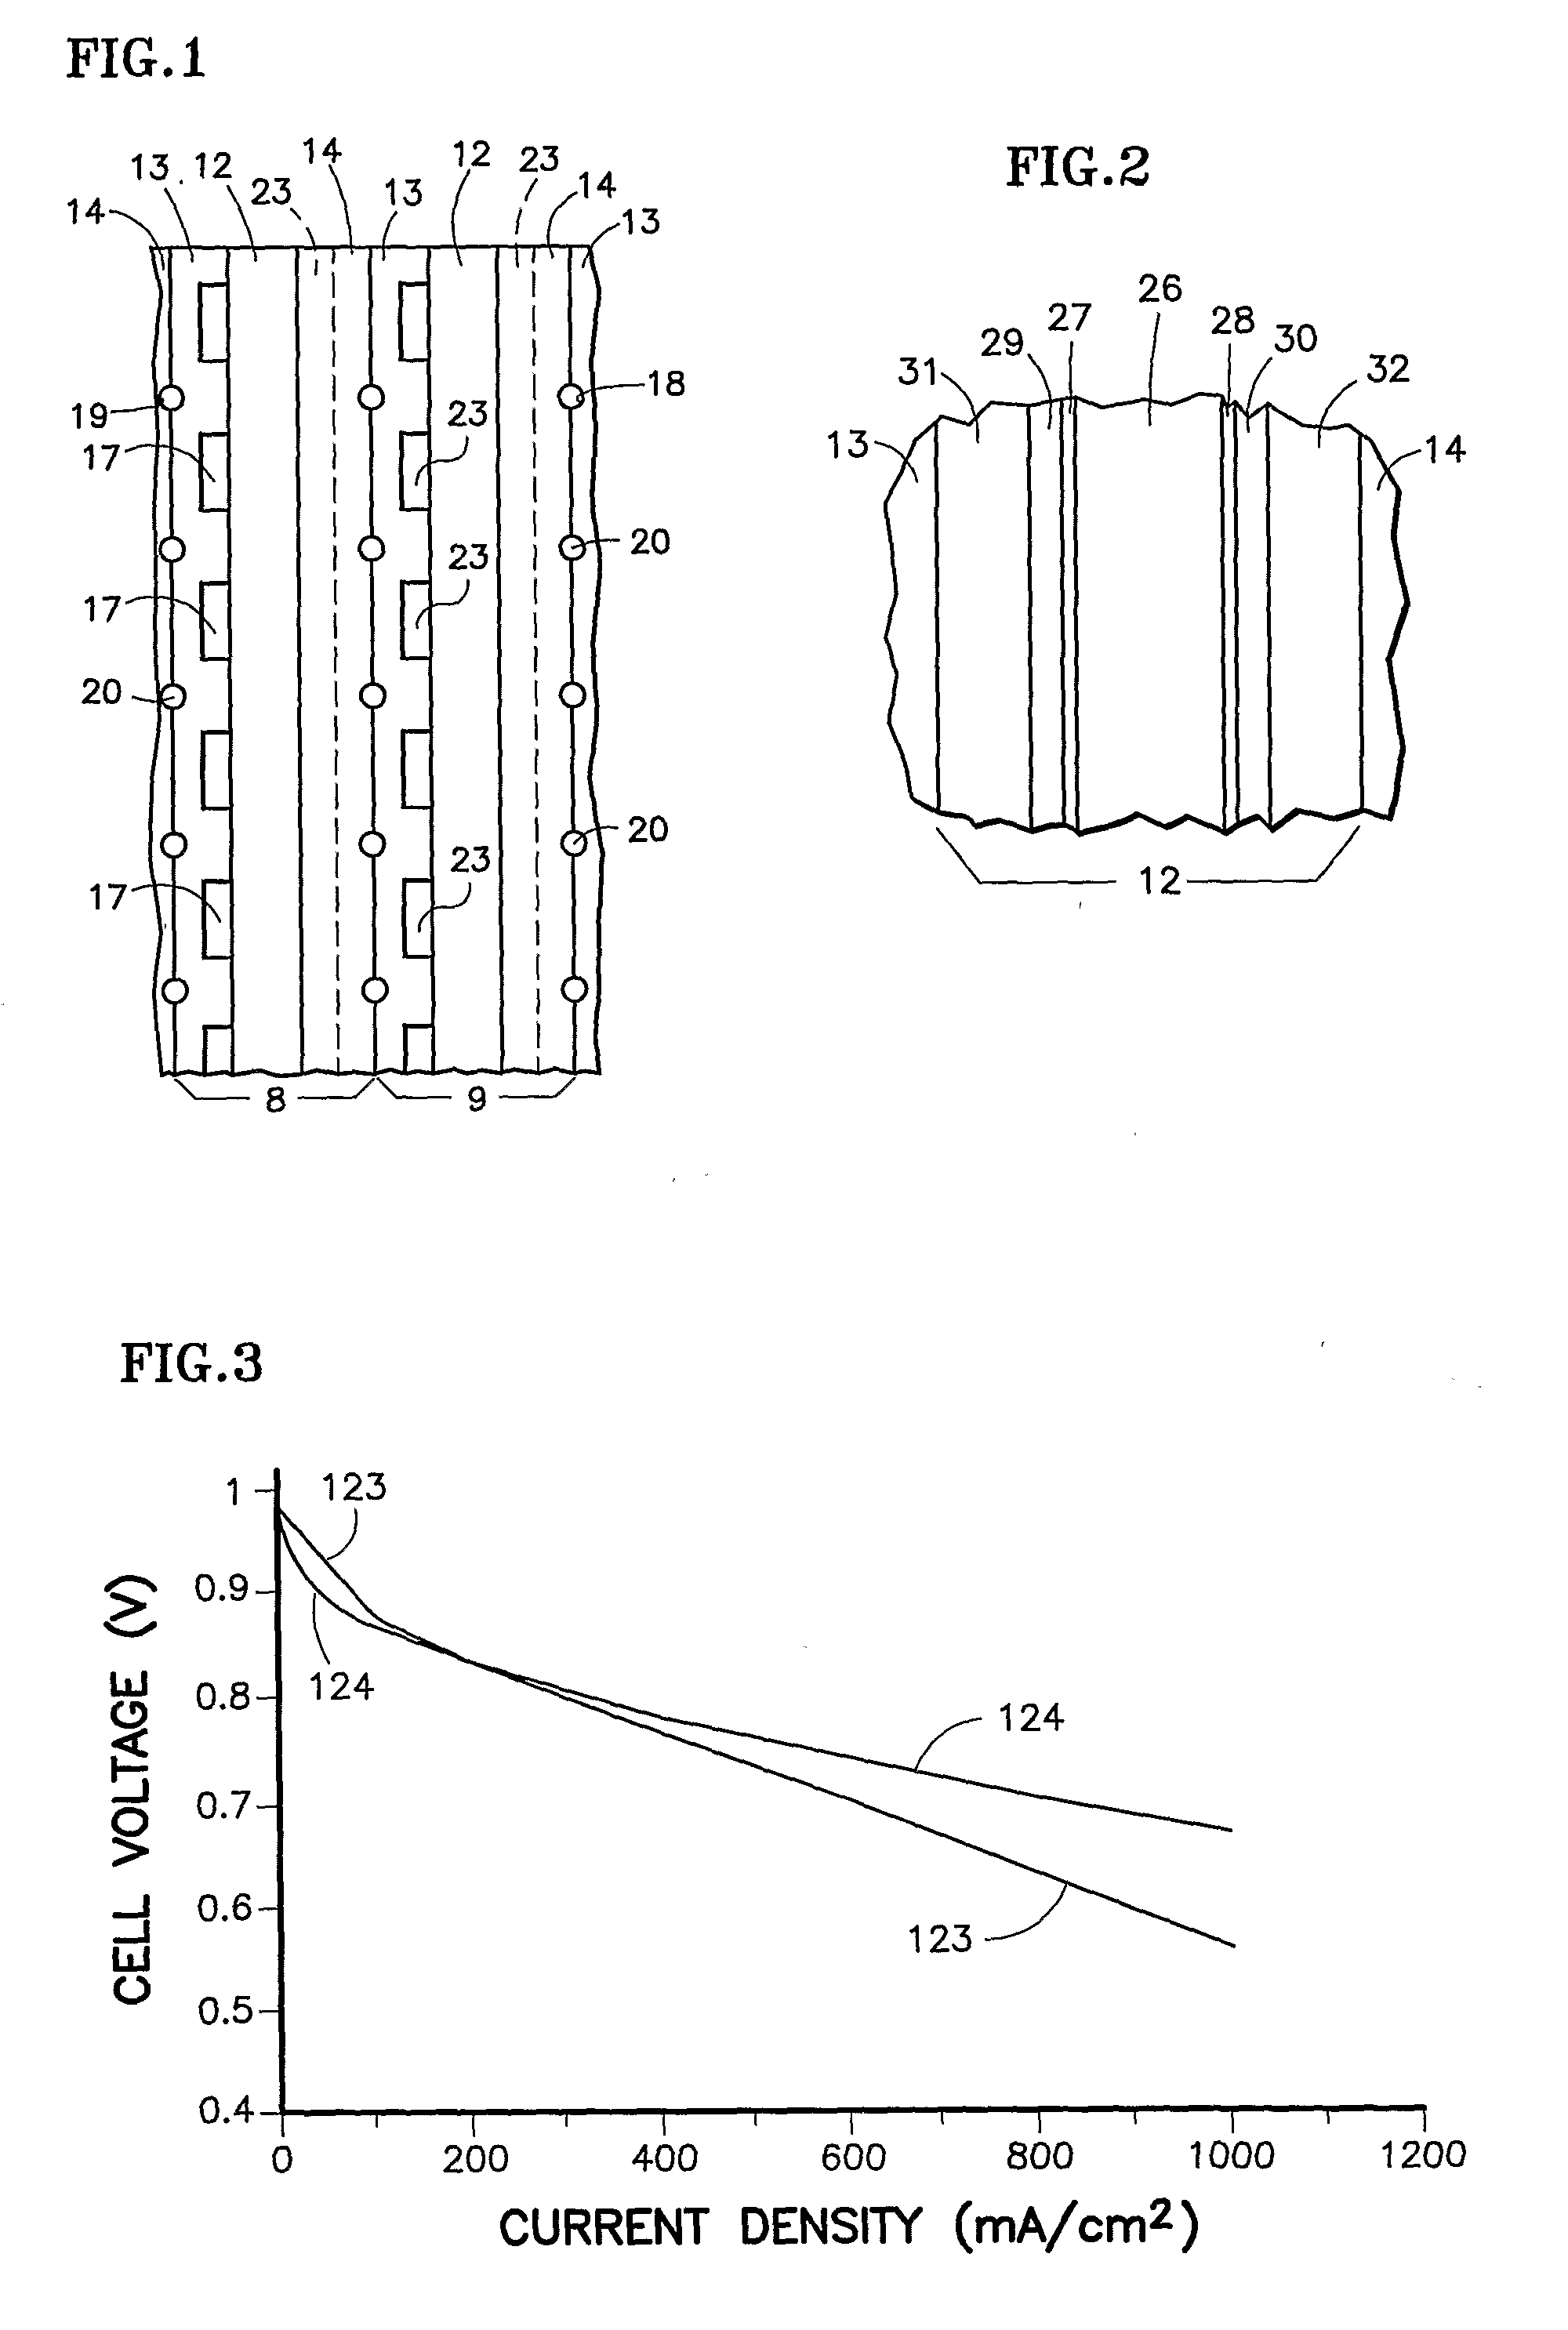 Fuel Cell Employing Hydrated Non-Perfluorinated Hydrocarbon Ion Exchange Membrane